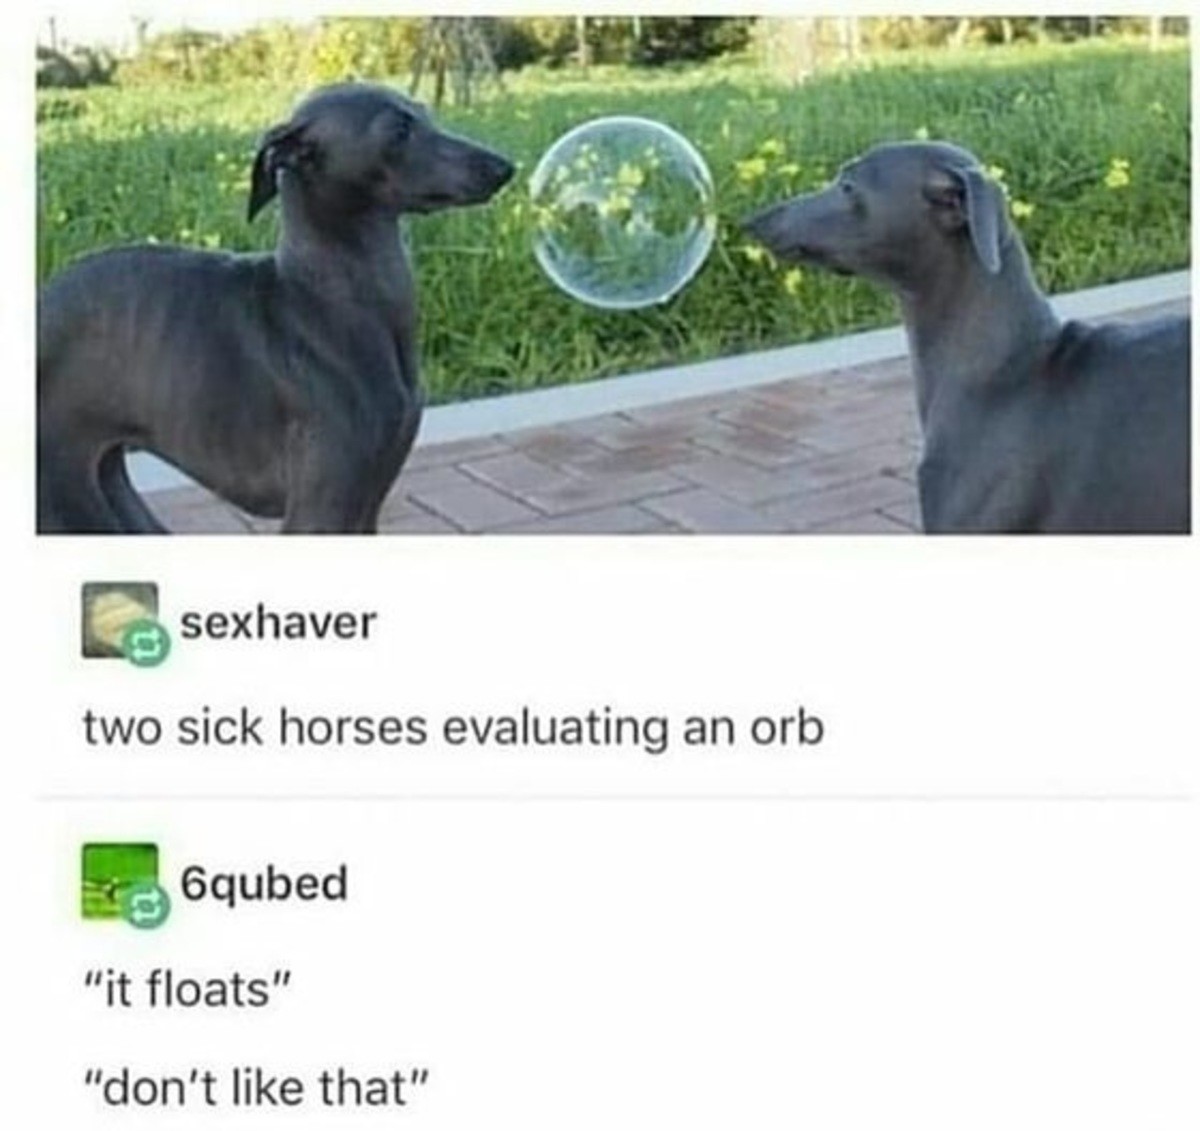 Two sick horses. .. Those are seals, 4chan is retarded.